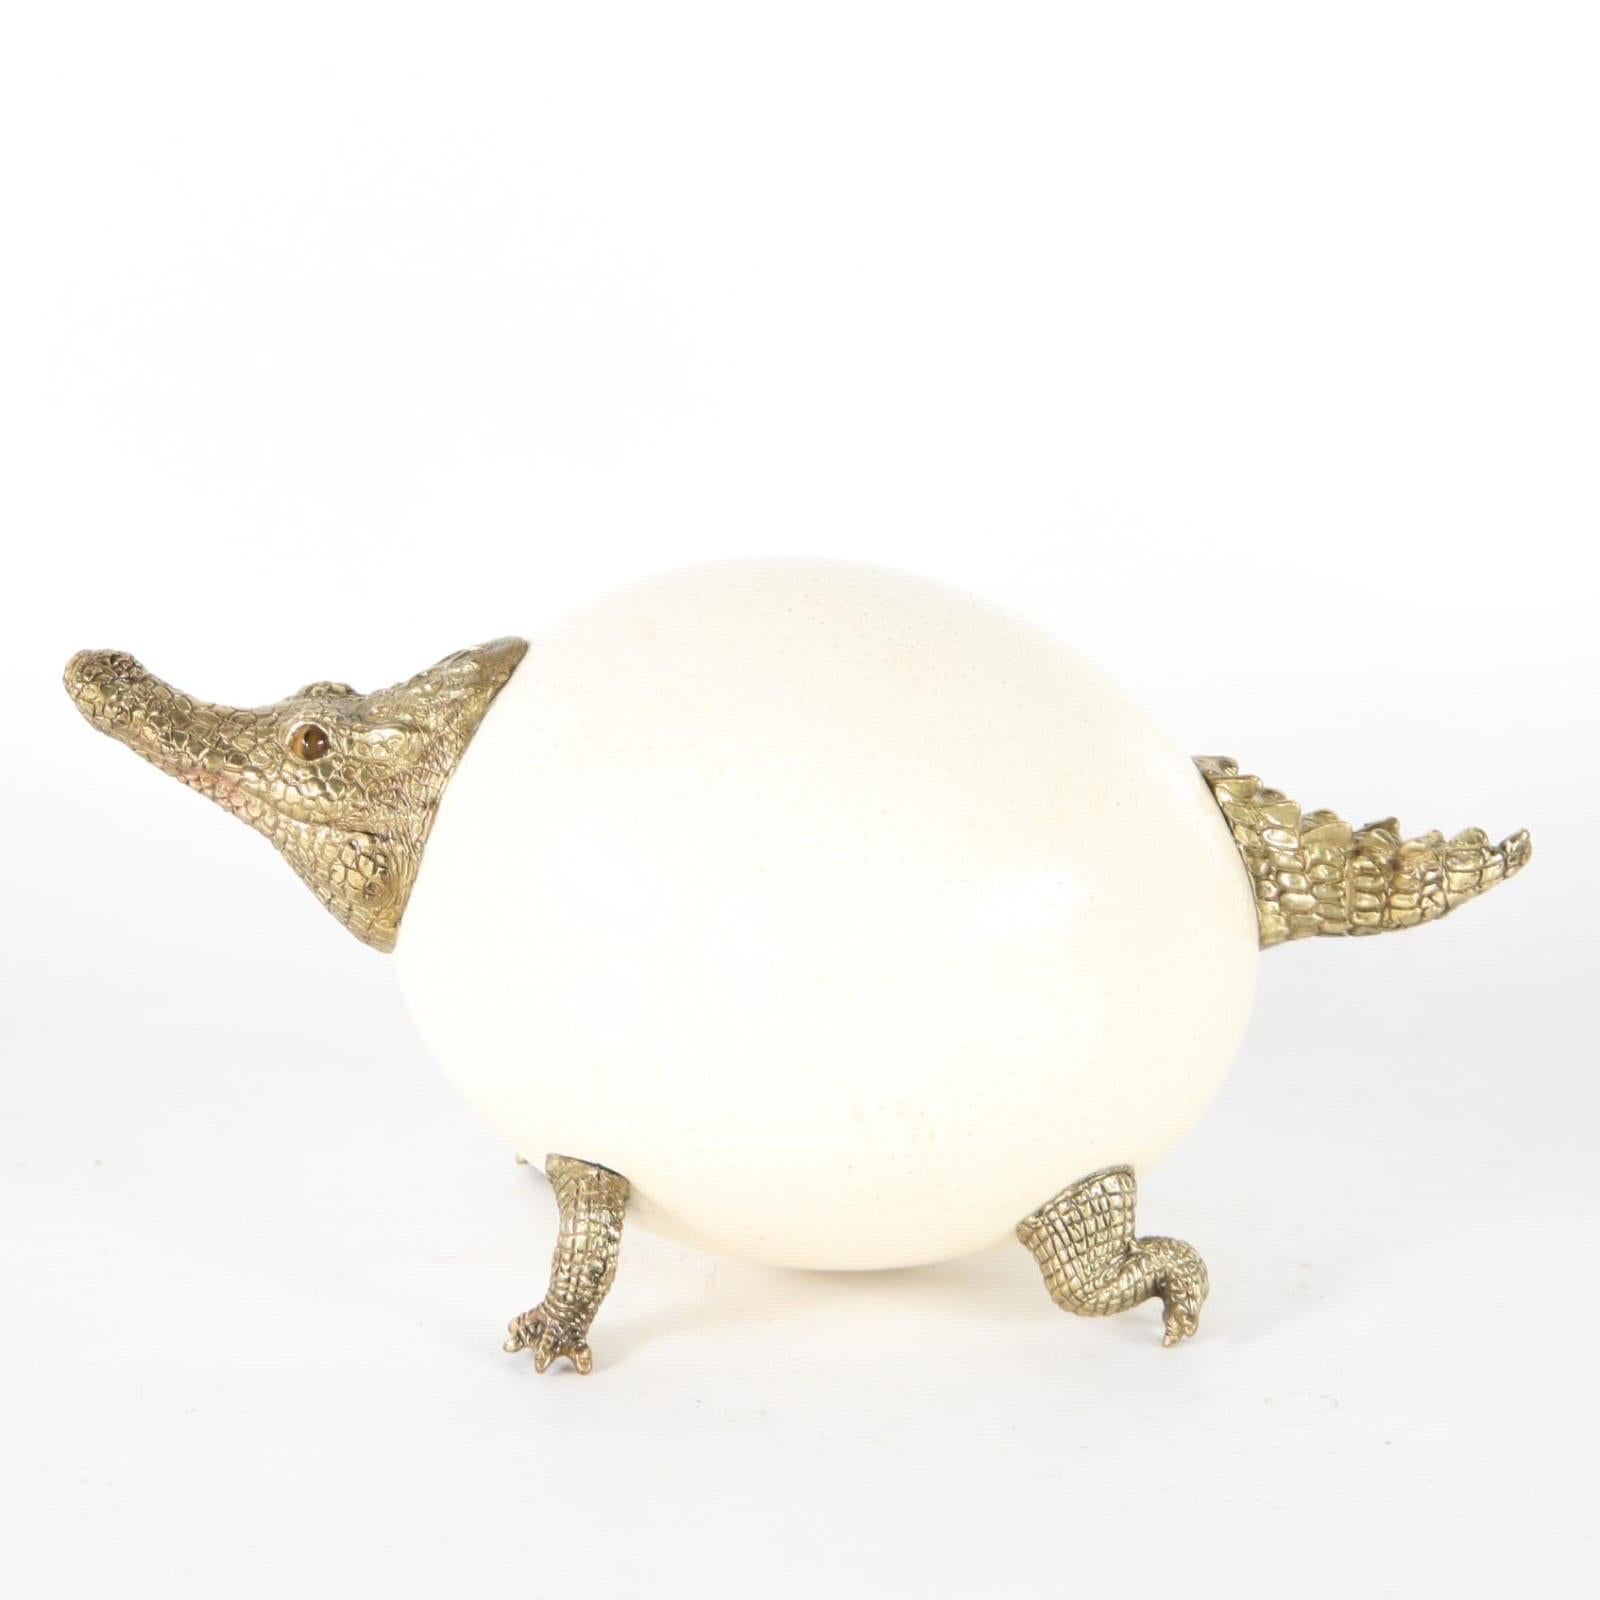 Contemporary sculpture representing a funny crocodile made of finely chiseled gilded bronze and ostrich egg. Hard stone eyes. 
High quality work, excellent condition. 